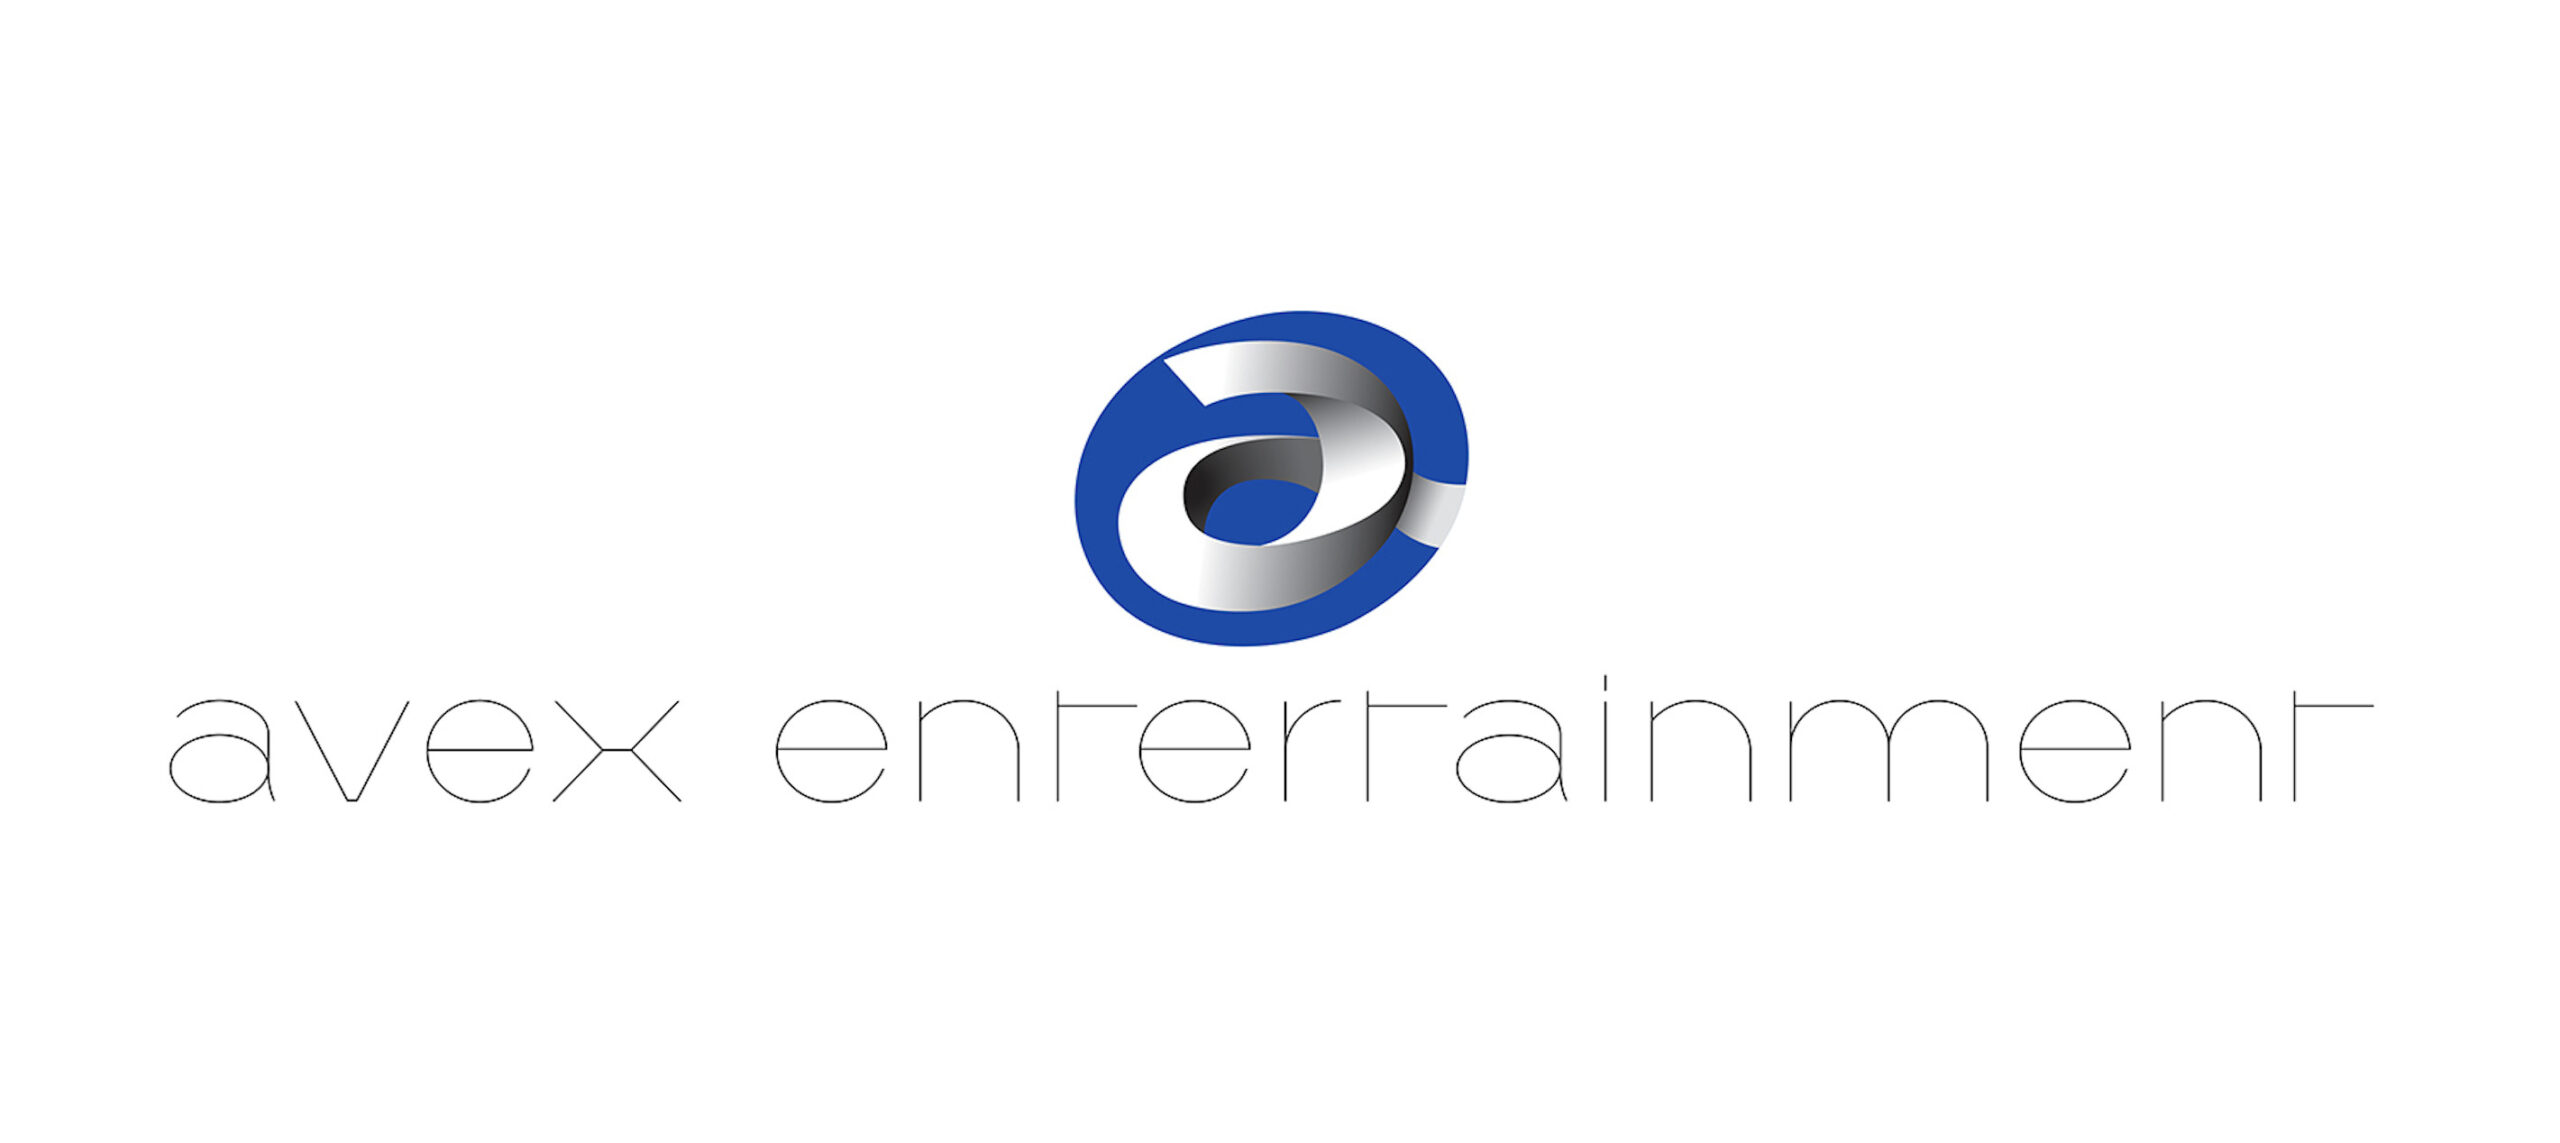 Entertainment Industry-Specific, Fast and High-Quality Multilingual Translation Service; Supporting Avex Entertainment’s Accelerated Overseas Expansion with Flitto’s Localized Translation Services